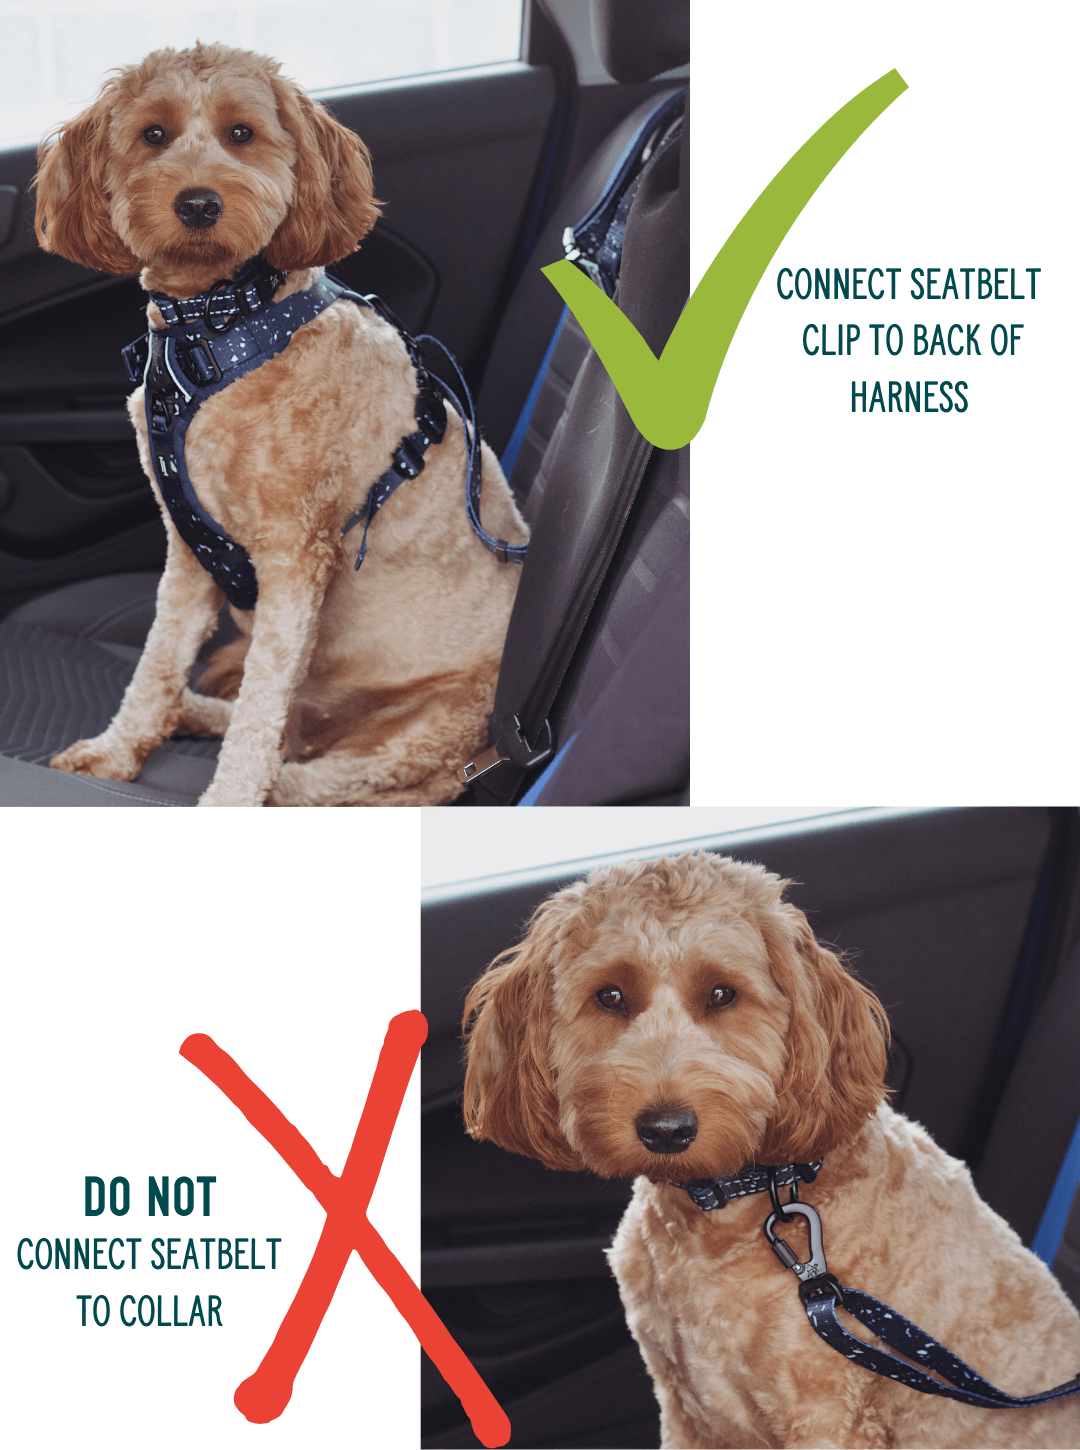 labradoodle image guide showing that a twiggy tags seatbelt should be attached to harness and not collar